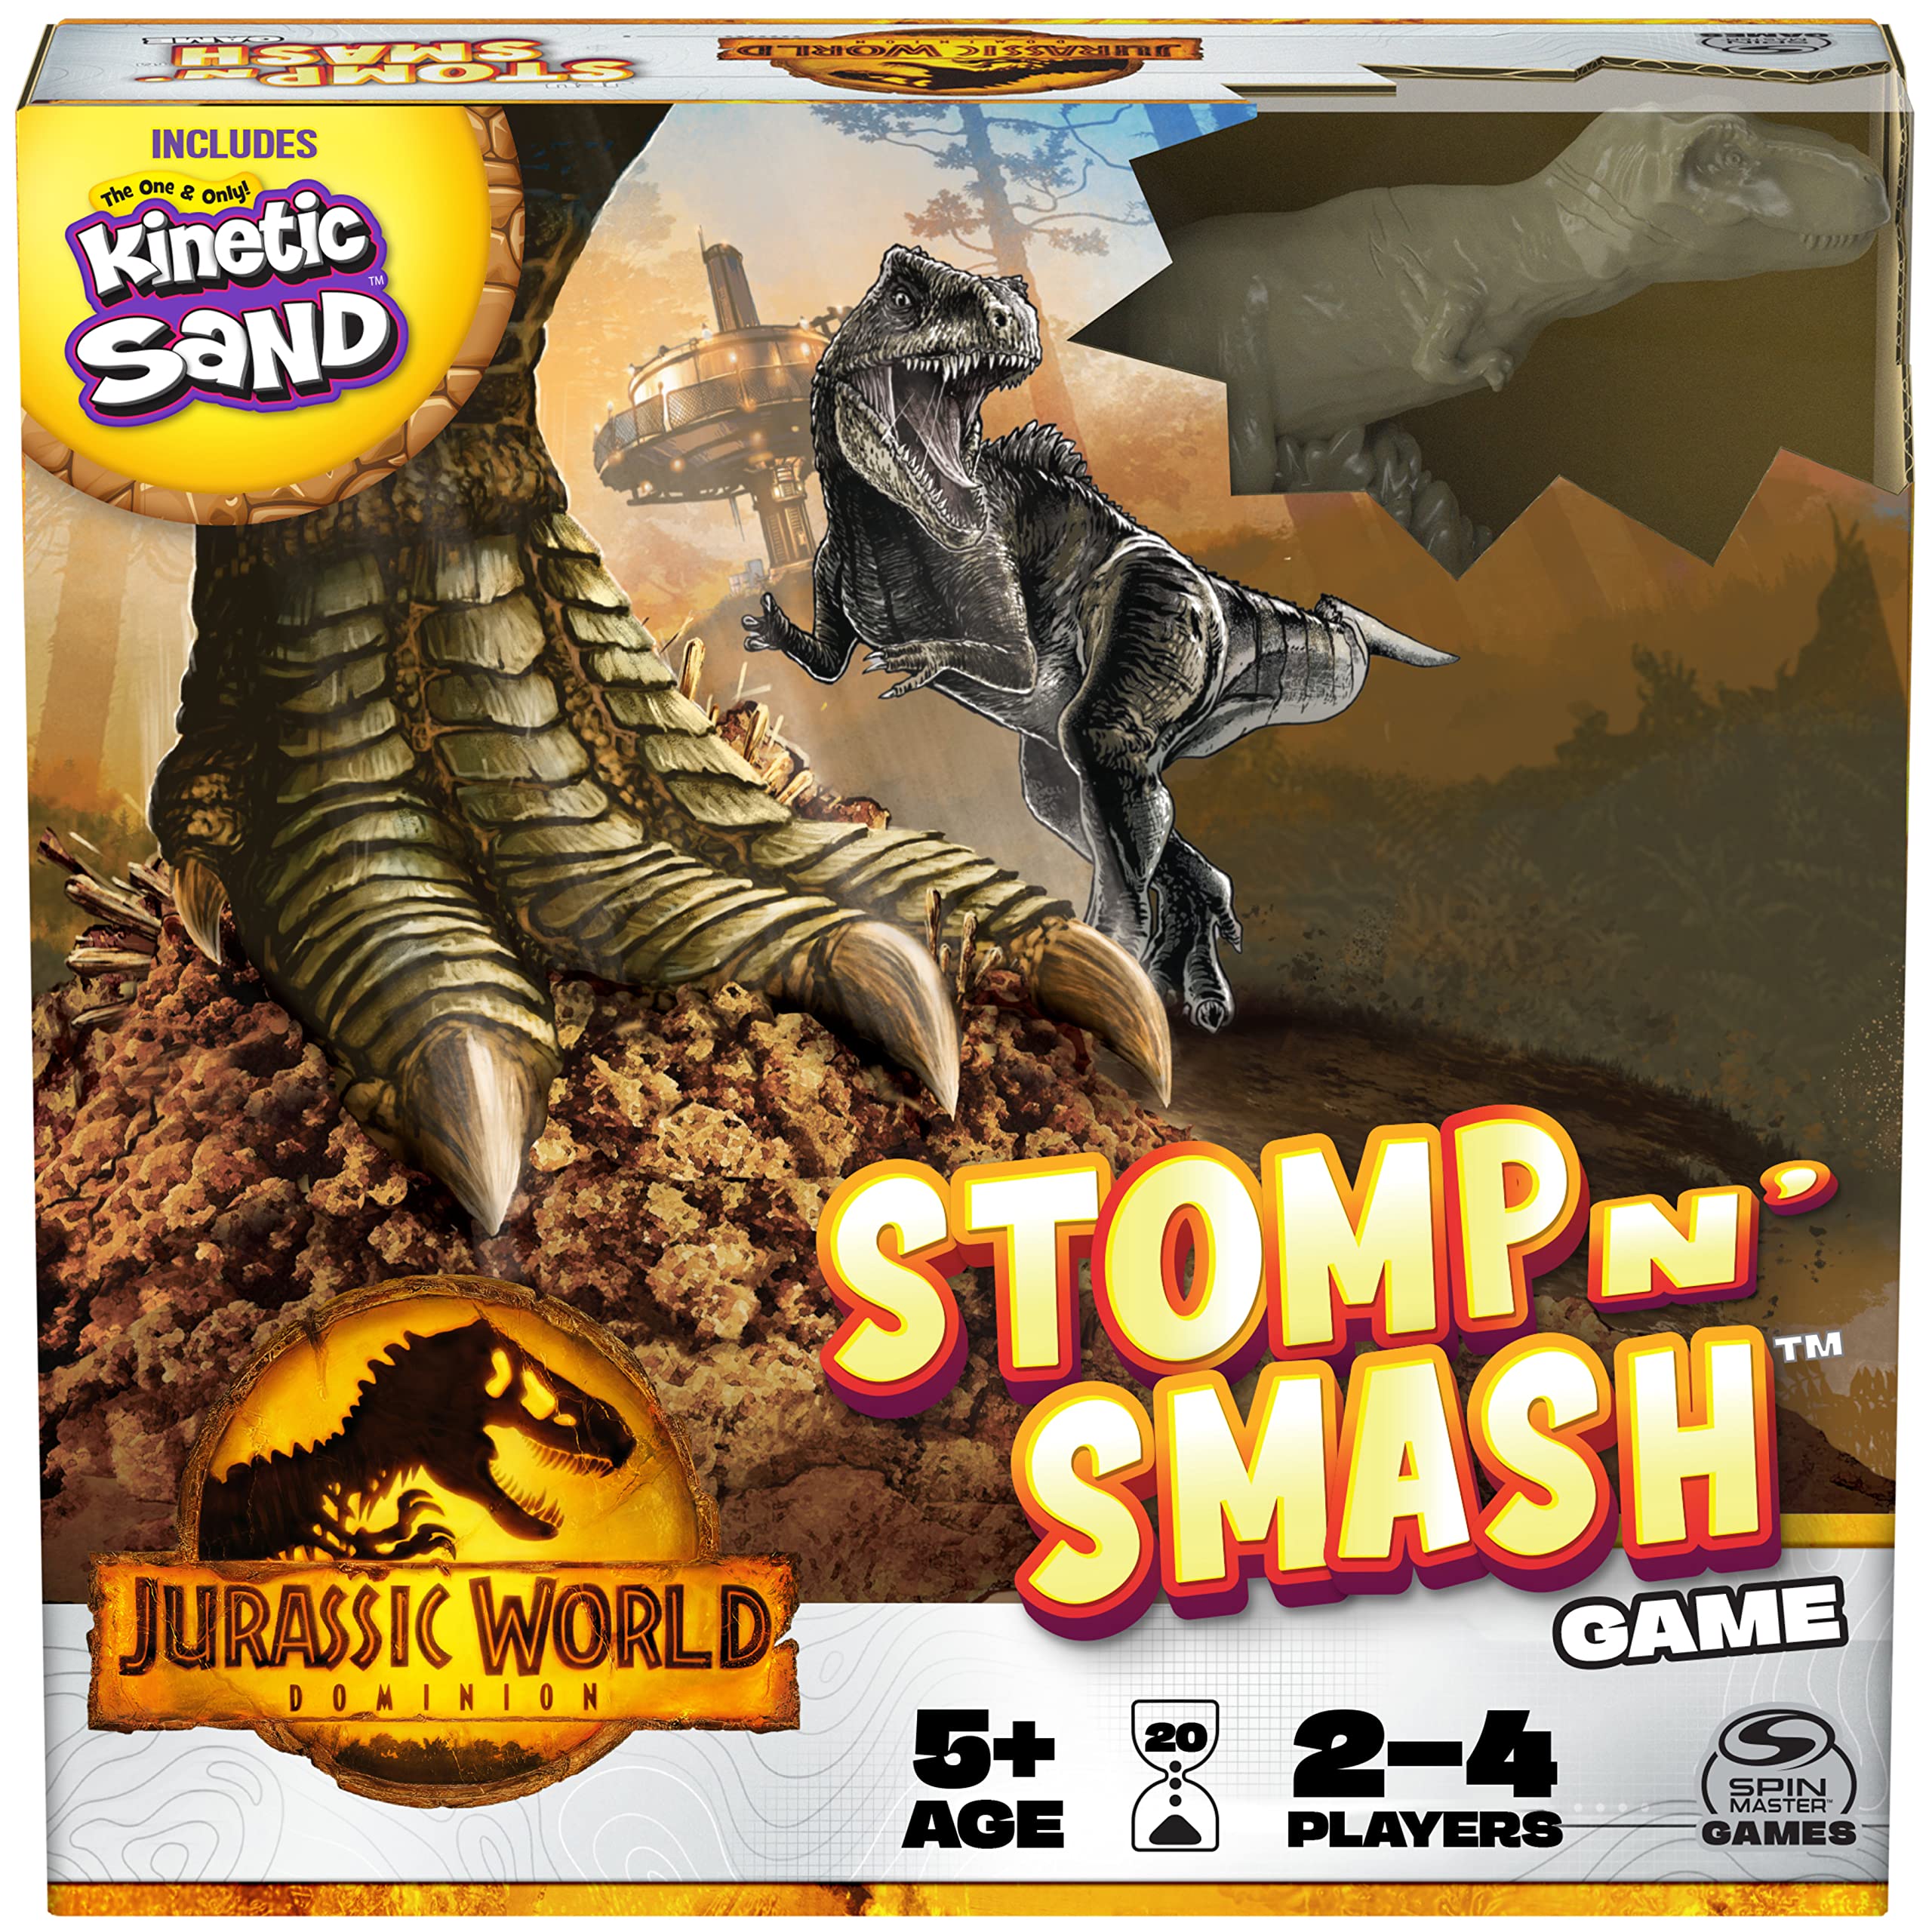 Jurassic World Dominion: Stomp N' Smash Board Game w/ 1 Bag of Kinetic Sand + 2 Dino Molds $5.25 + Free Shipping w/ Prime or on $25+